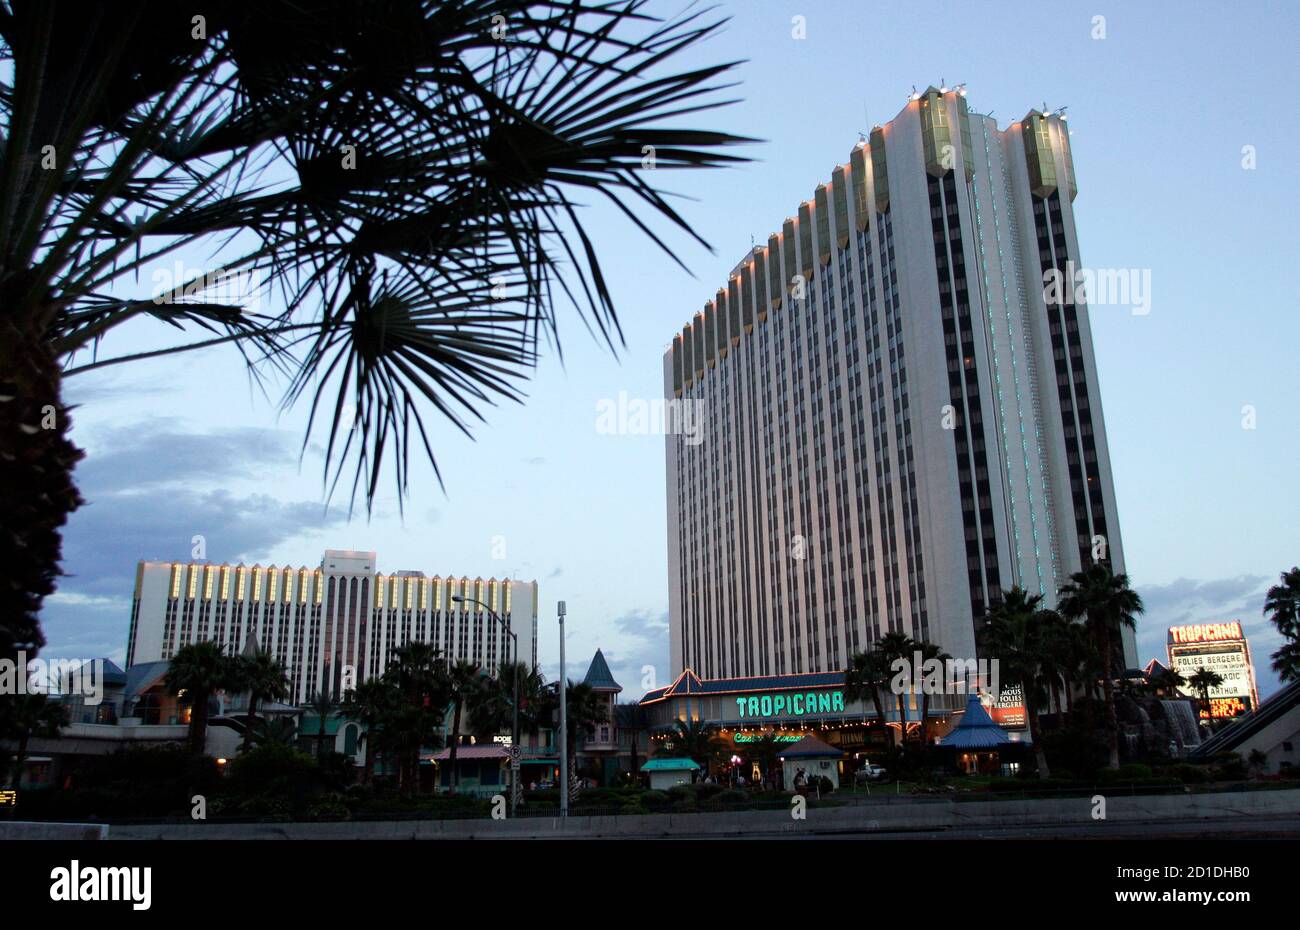 A view of the Tropicana hotel and casino in Las Vegas, Nevada May 5, 2008. Tropicana Entertainment, which owns the Tropicana, is filing for Chapter 11 bankruptcy protection. According to an article by the Las Vegas Sun, Tropicana Entertainment lost its biggest asset when New Jersey regulators removed the company's gaming license at the Tropicana hotel and casino in Atlantic City, New Jersey. That triggered a lawsuit by bondholders seeking immediate repayment. REUTERS/Las Vegas Sun/Steve Marcus (UNITED STATES) Stock Photo